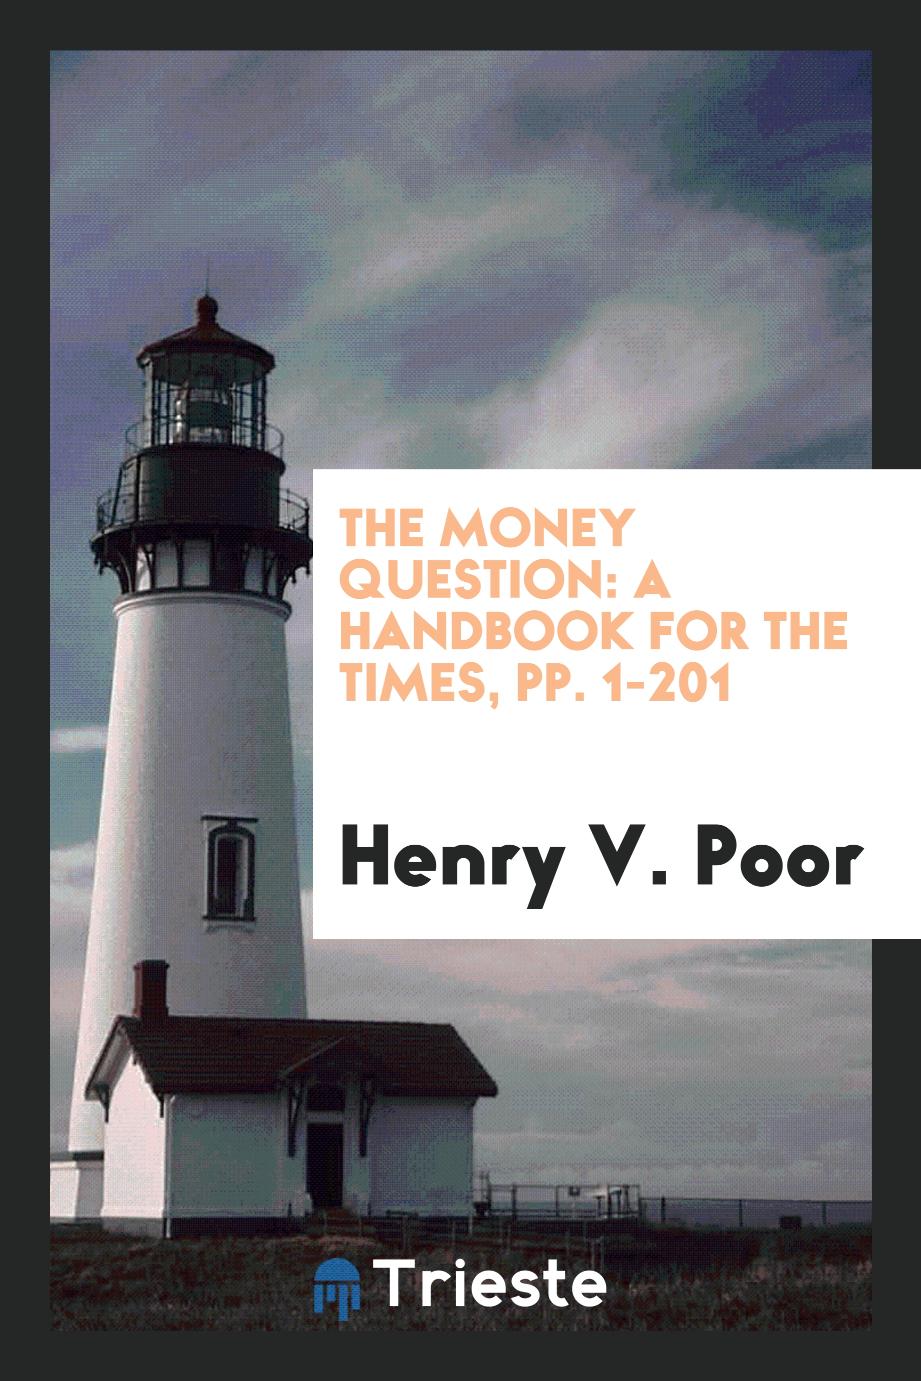 The Money Question: A Handbook for the Times, pp. 1-201